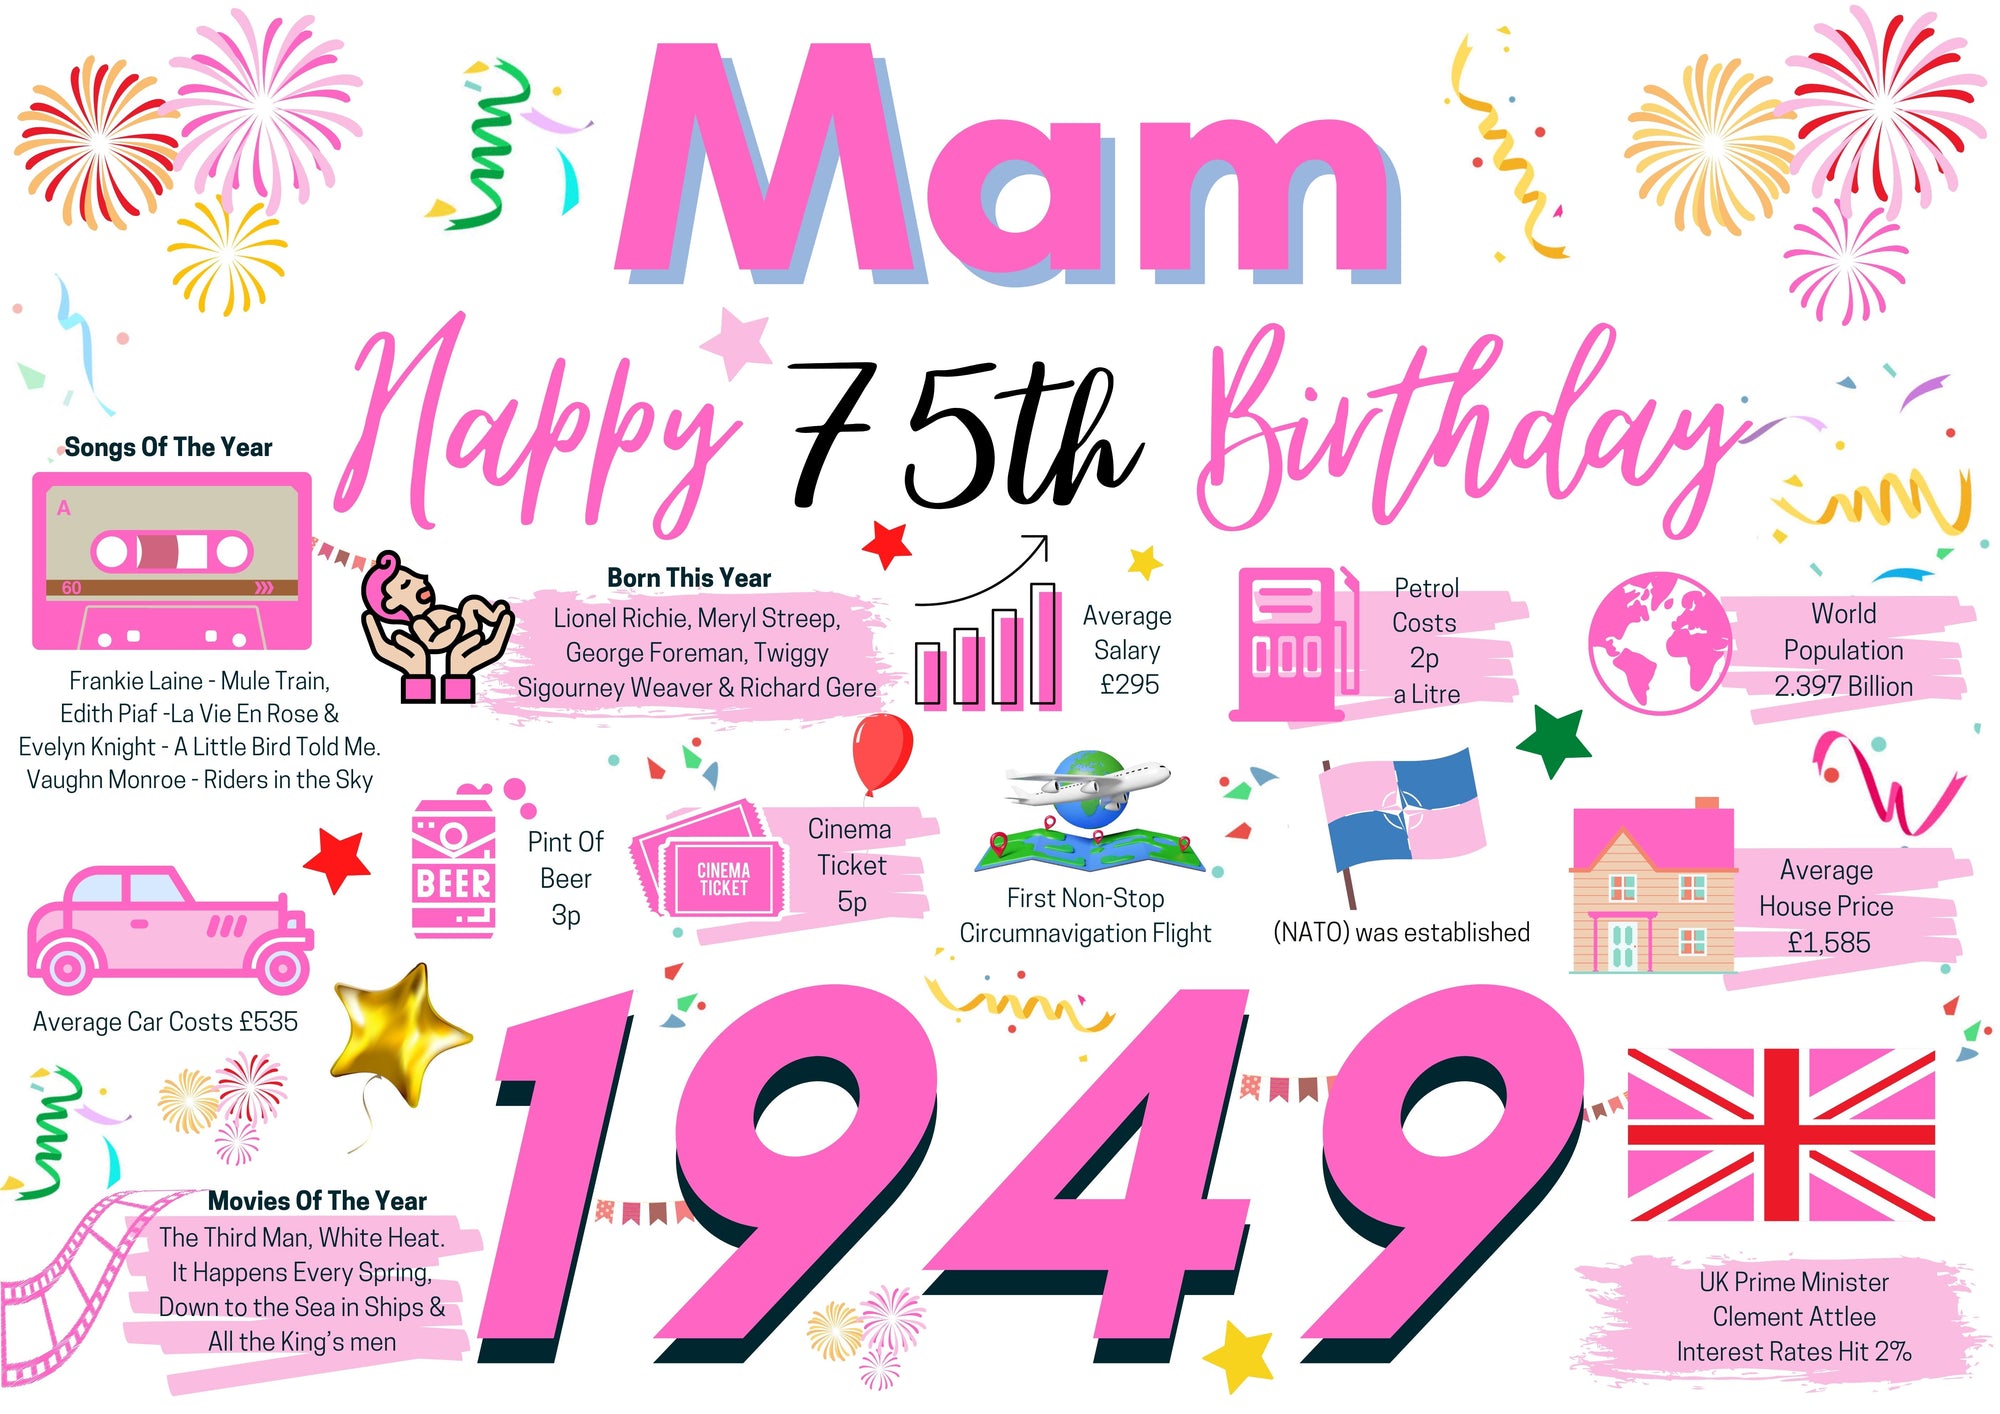 75th Birthday Card For Mam, Birthday Card 75 For Her, Happy 75th Greetings Card Born In 1949 Facts Milestone